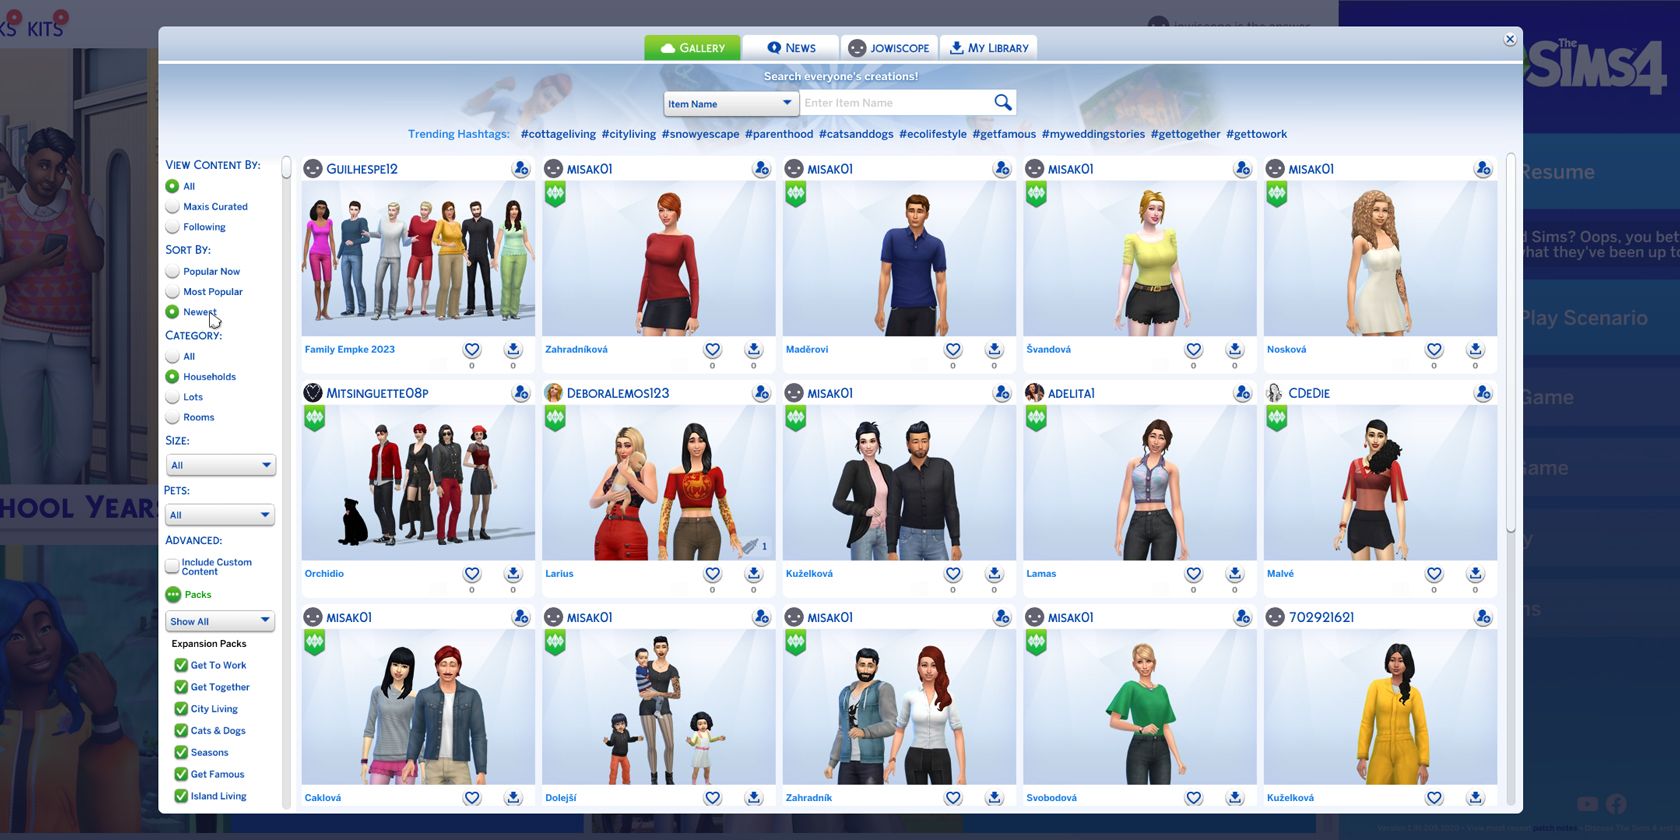 The Sims 4 Households in the Gallery